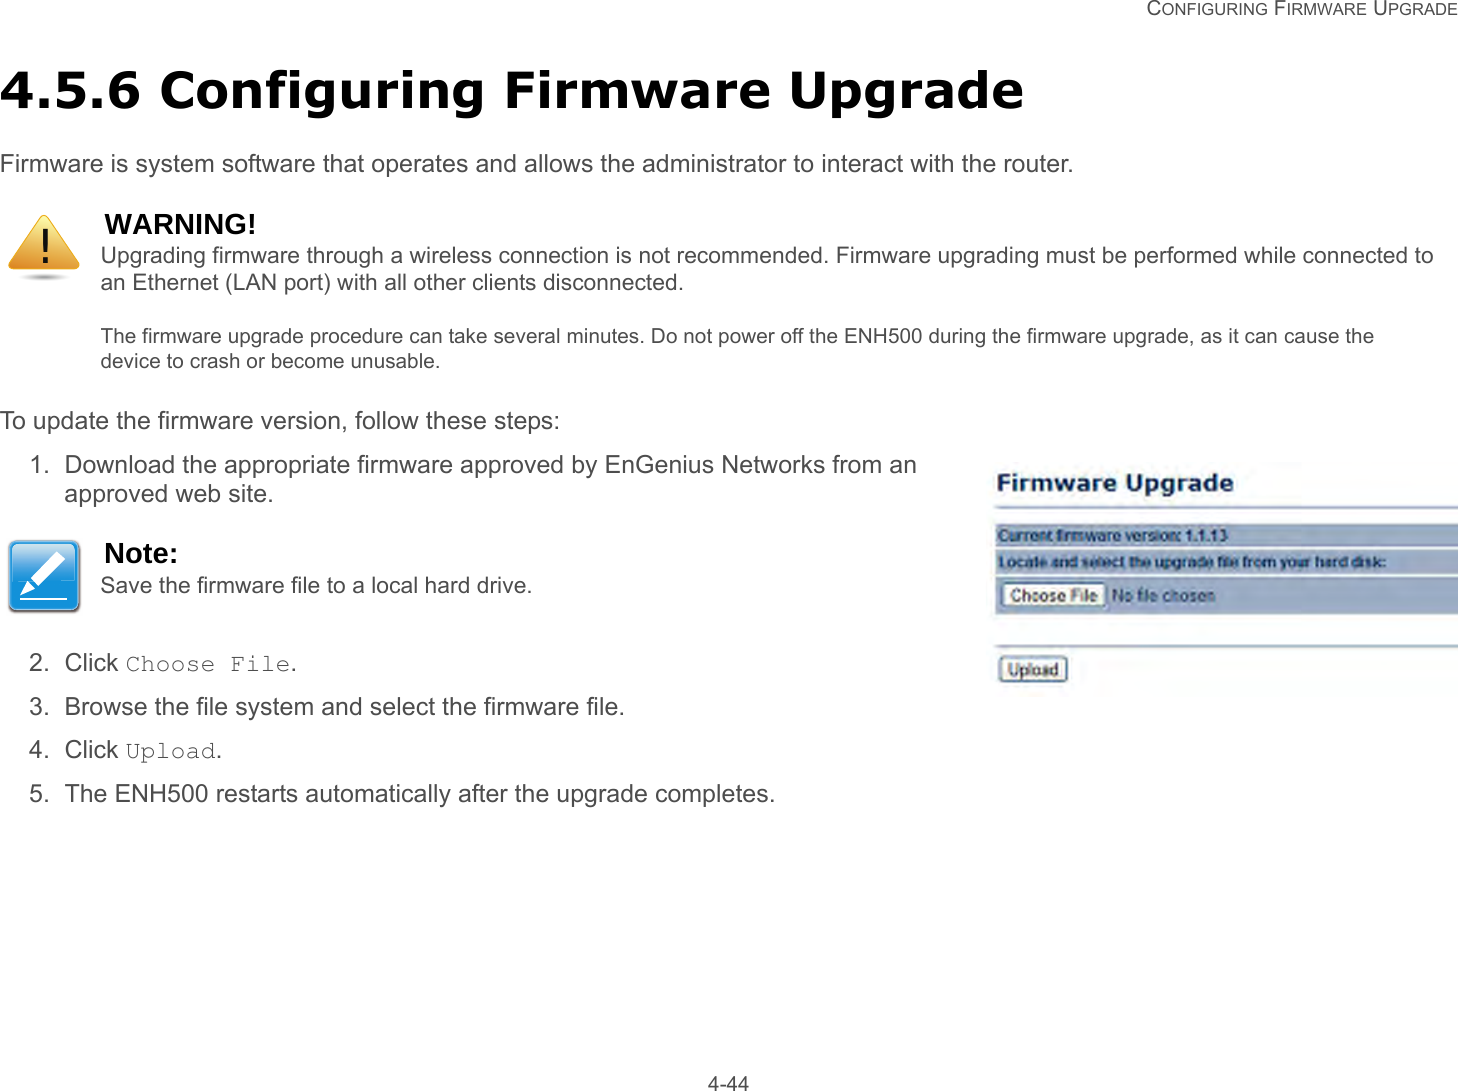   CONFIGURING FIRMWARE UPGRADE 4-444.5.6 Configuring Firmware UpgradeFirmware is system software that operates and allows the administrator to interact with the router.To update the firmware version, follow these steps:1. Download the appropriate firmware approved by EnGenius Networks from an approved web site.2. Click Choose File.3. Browse the file system and select the firmware file.4. Click Upload.5. The ENH500 restarts automatically after the upgrade completes.WARNING!Upgrading firmware through a wireless connection is not recommended. Firmware upgrading must be performed while connected to an Ethernet (LAN port) with all other clients disconnected.The firmware upgrade procedure can take several minutes. Do not power off the ENH500 during the firmware upgrade, as it can cause the device to crash or become unusable.Note:Save the firmware file to a local hard drive.!